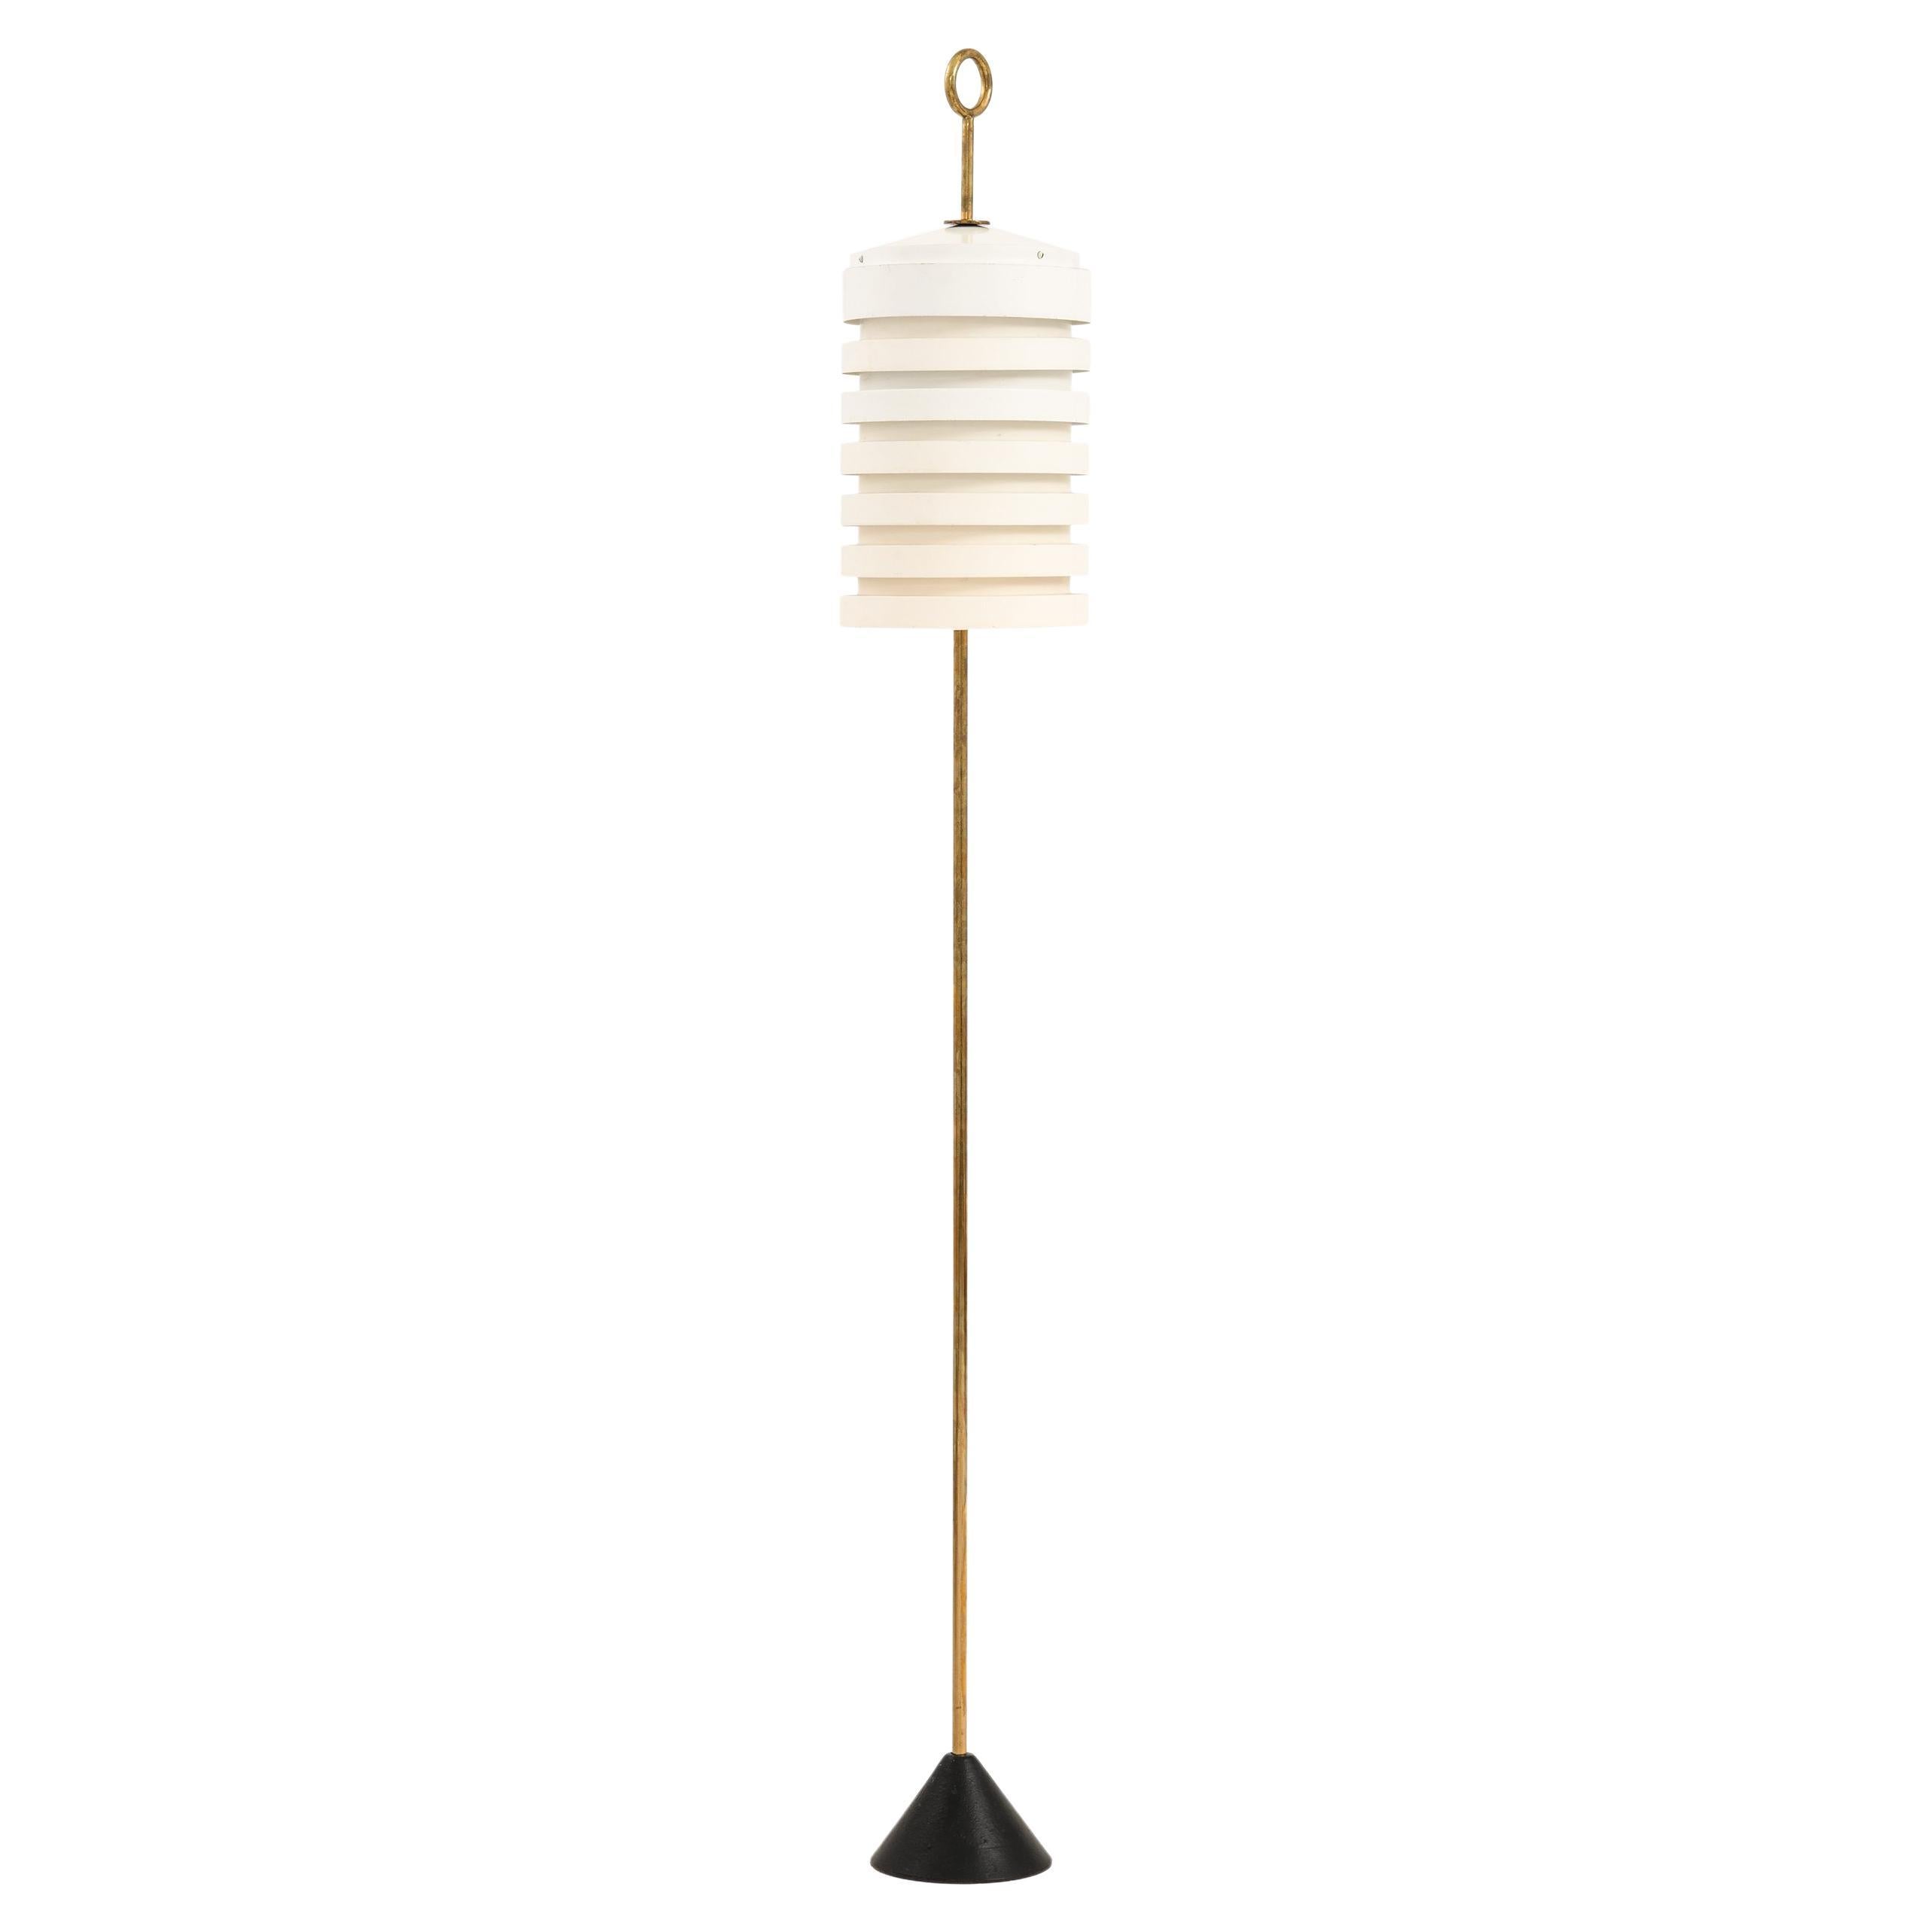 Large Floor Lamp in Brass, Black and White Metal by Hans-Agne Jakobsson, 1950's For Sale